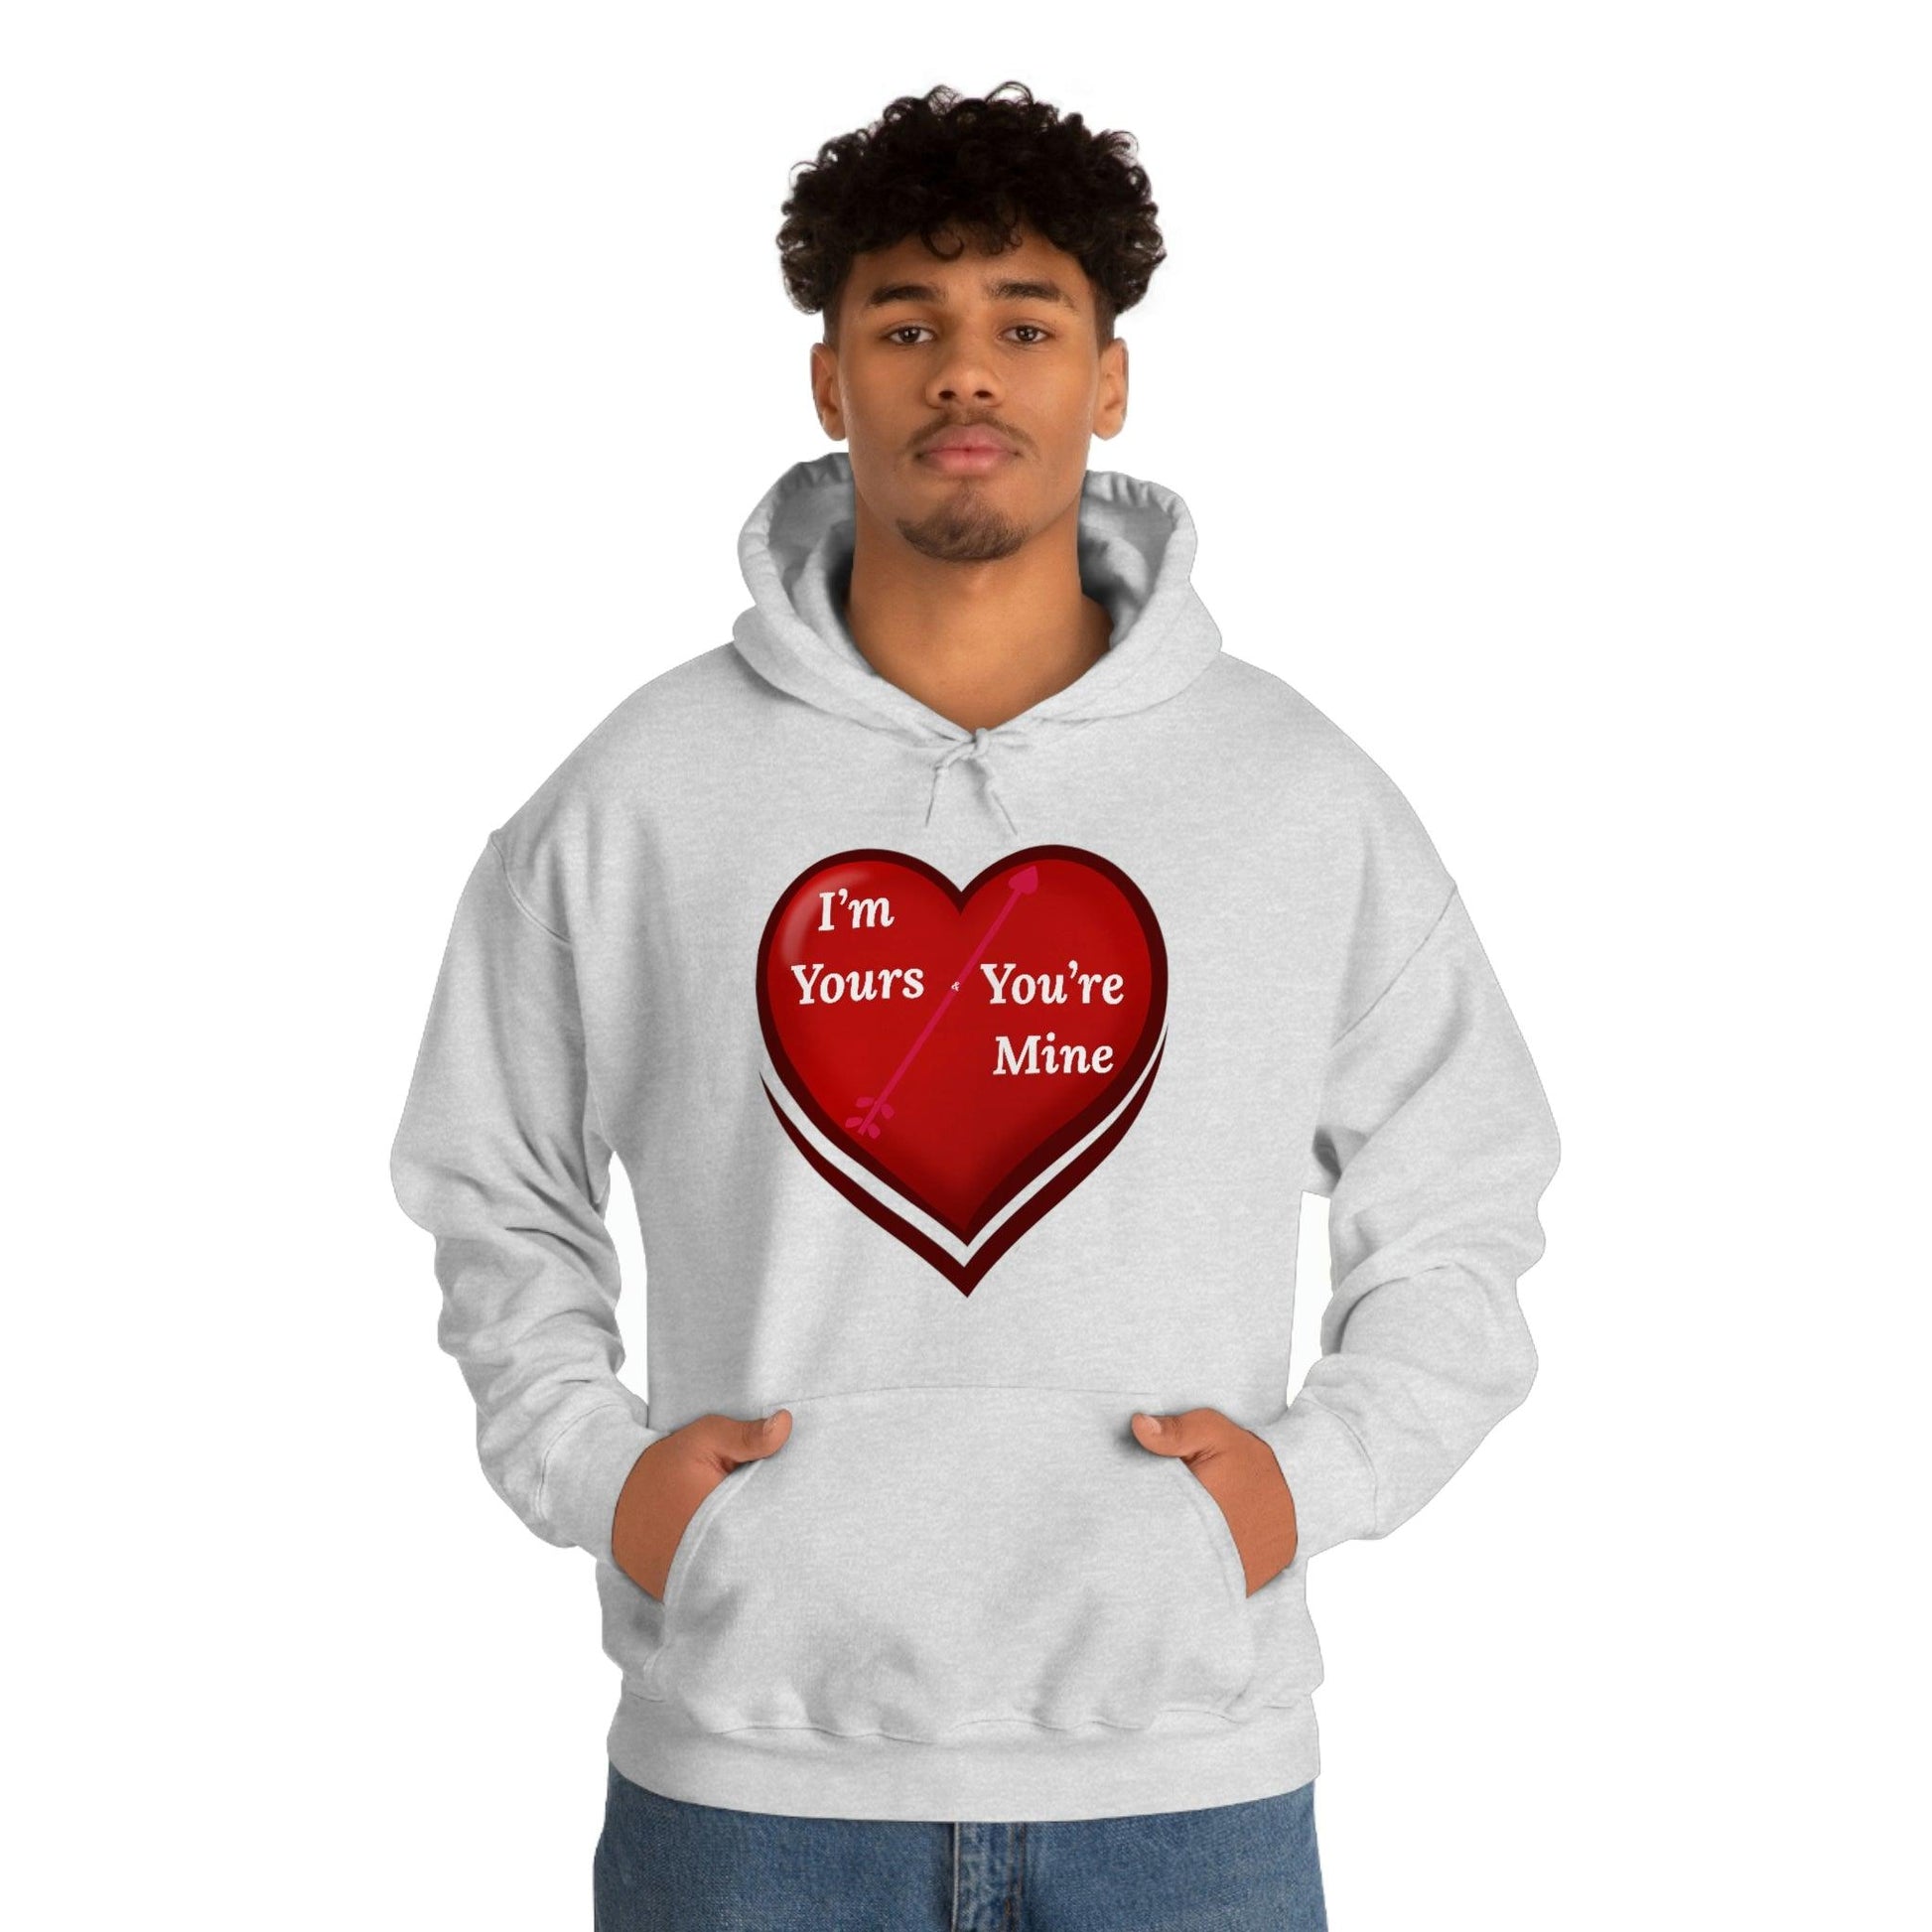 I'm Yours and You're Mine Heart Hooded Sweatshirt - Giftsmojo